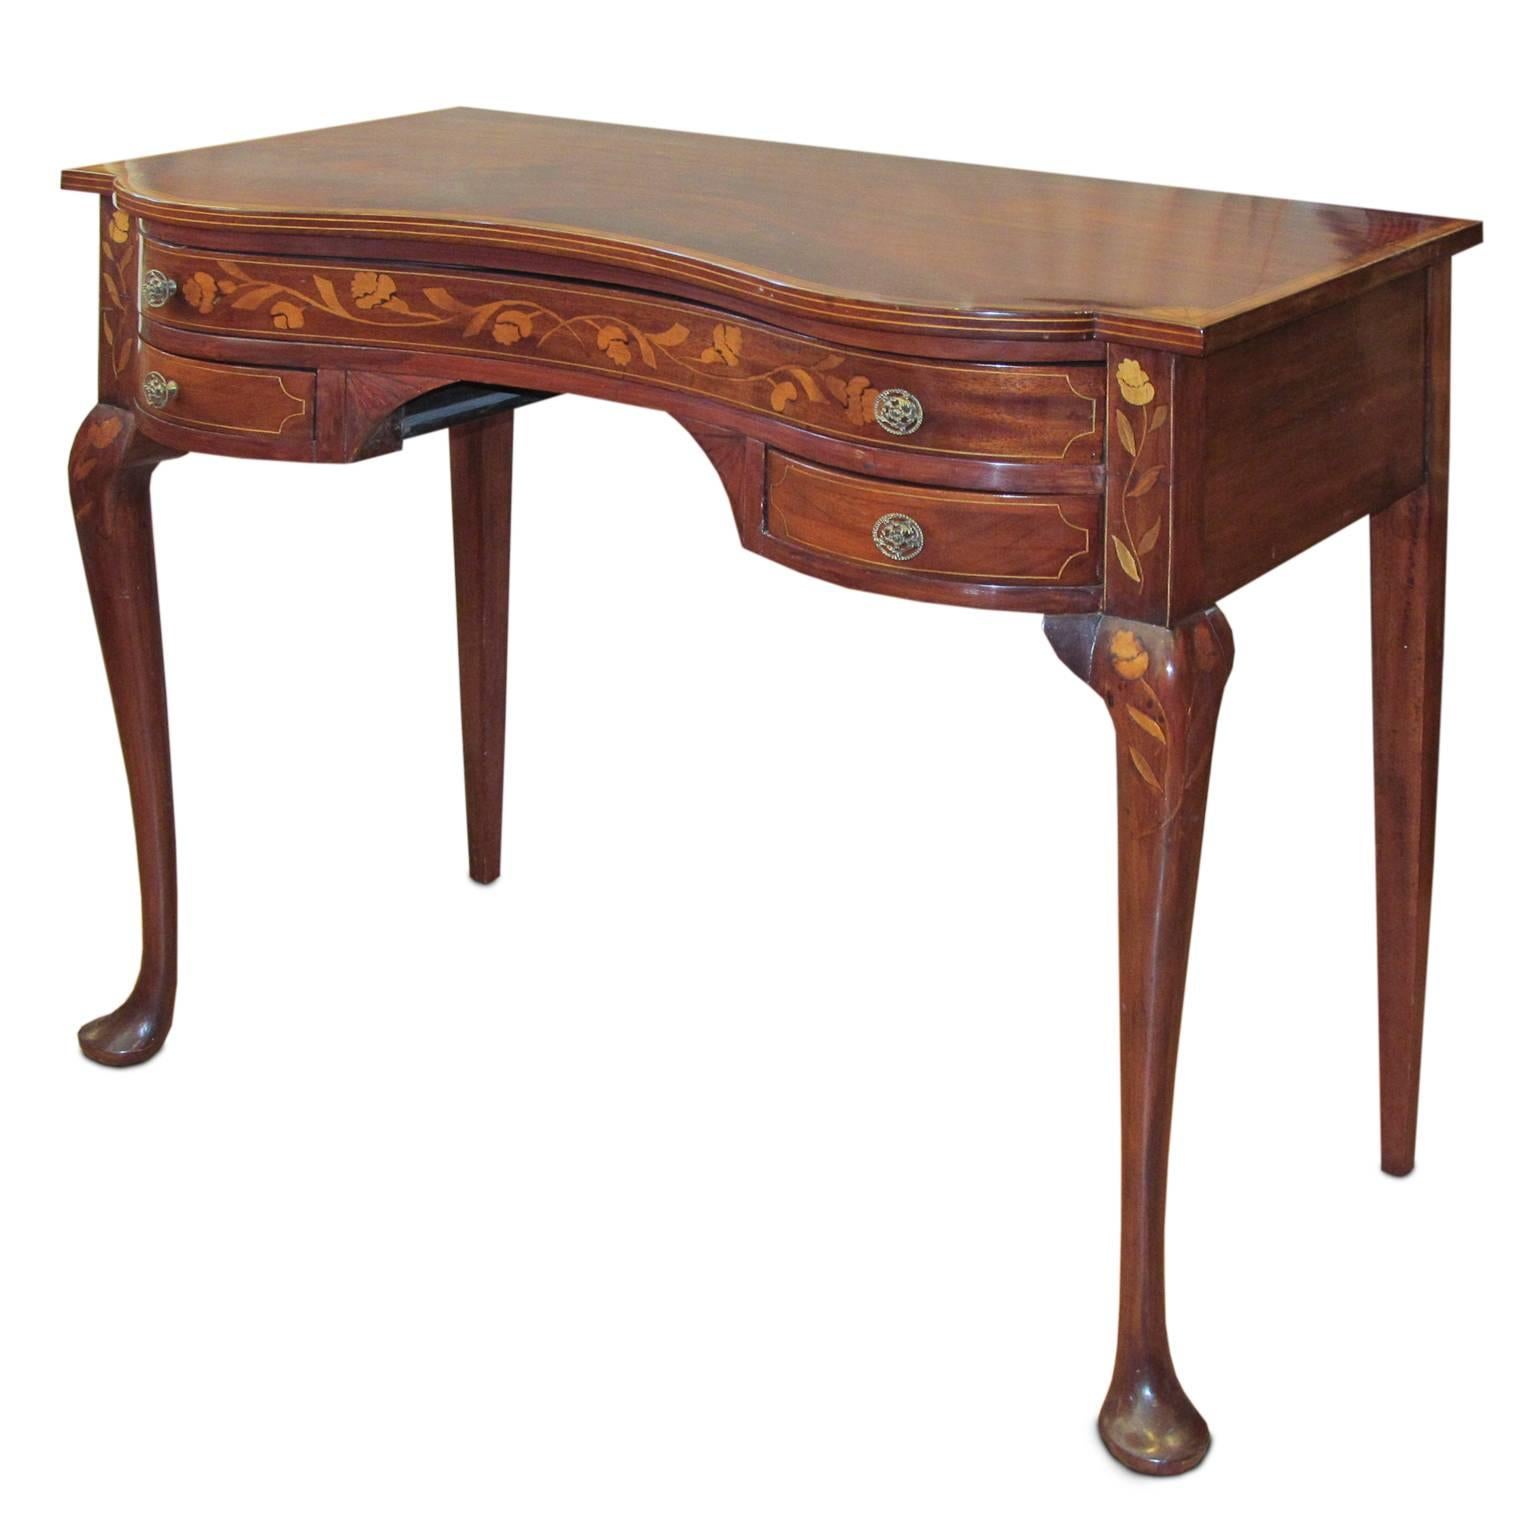 Dutch Serpentine Mahogany and Marquetry Inlaid Table